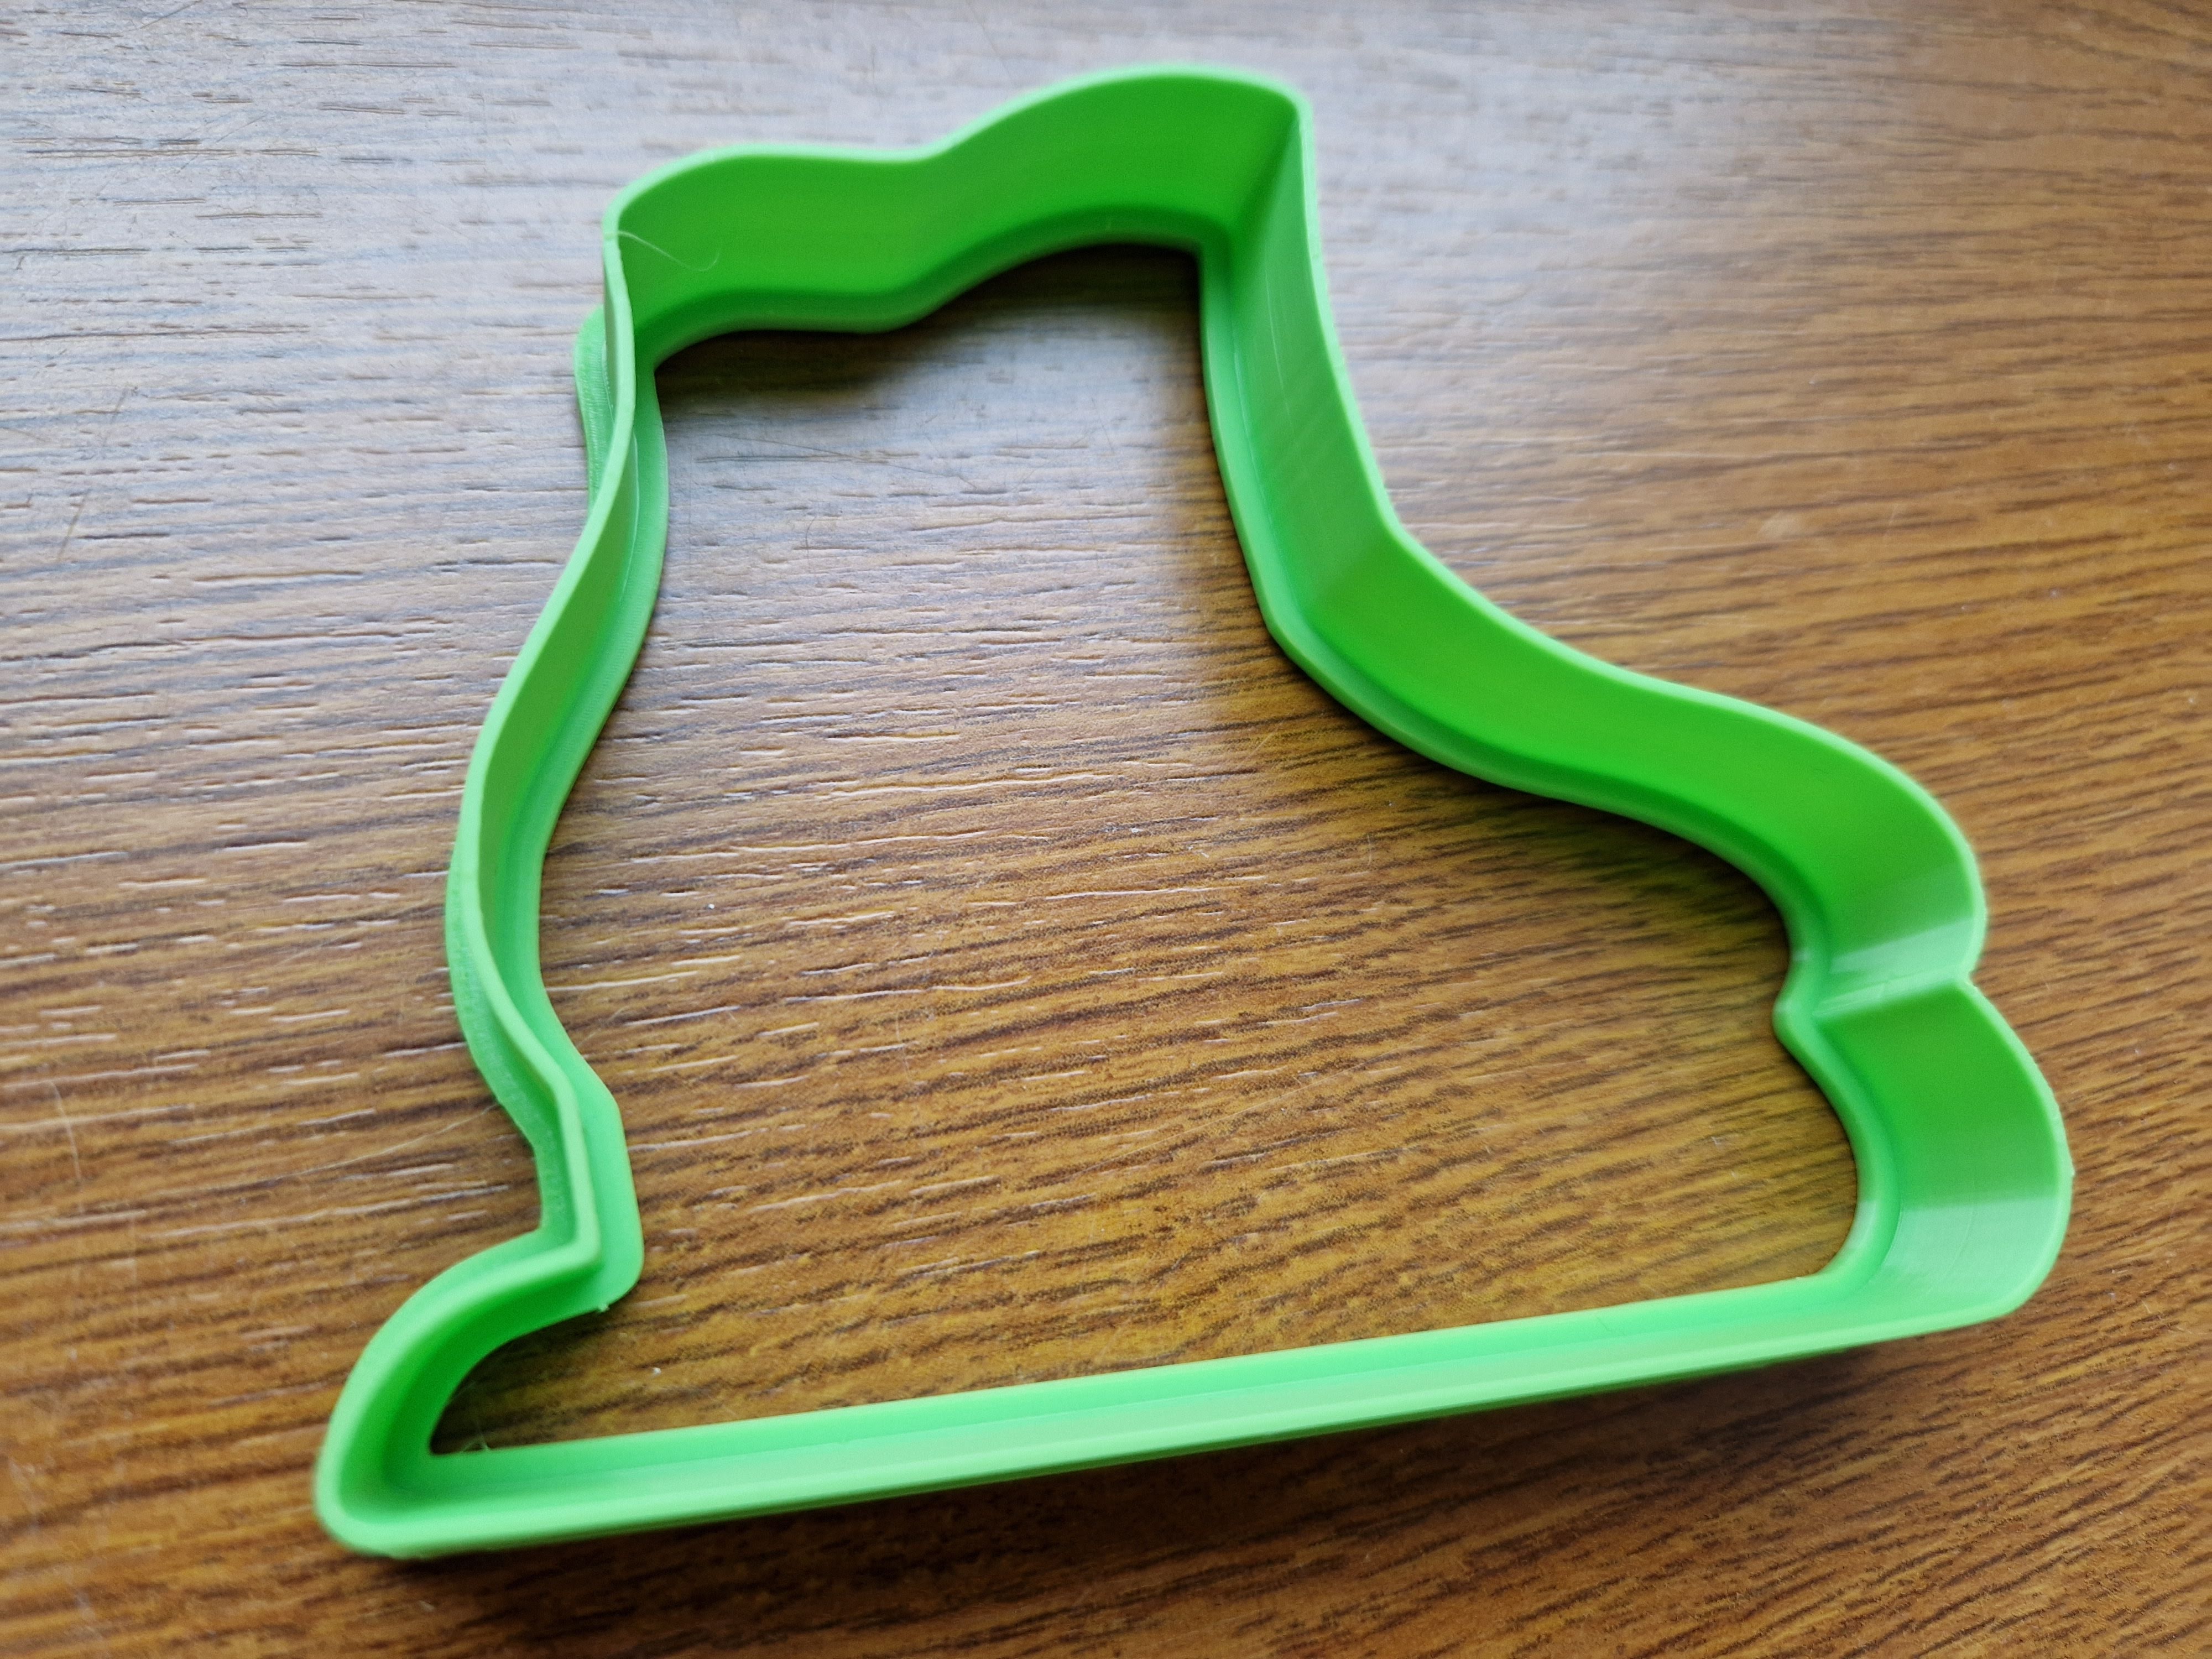 Cookie cutter in the shape of a skate